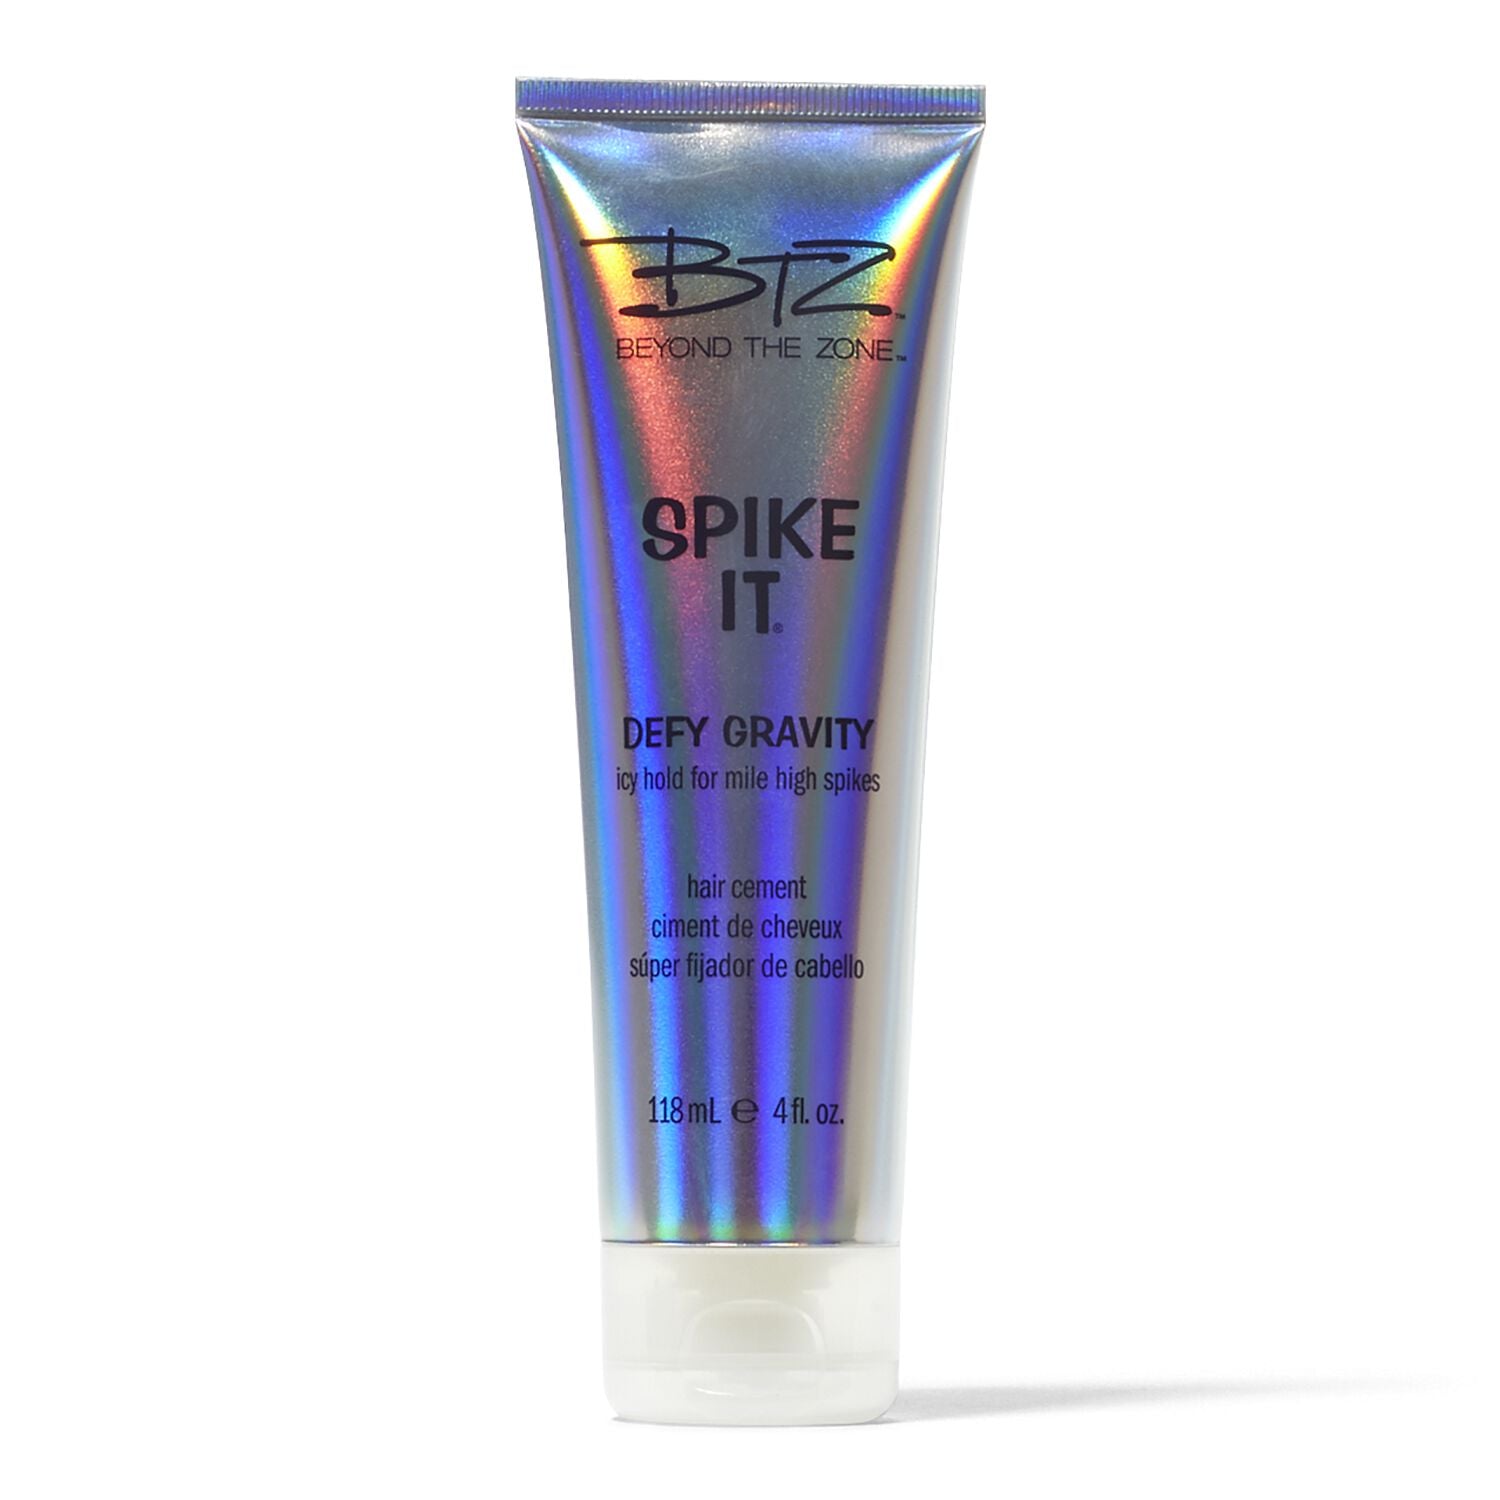 Spike It  by   Beyond the Zone Hair Cement